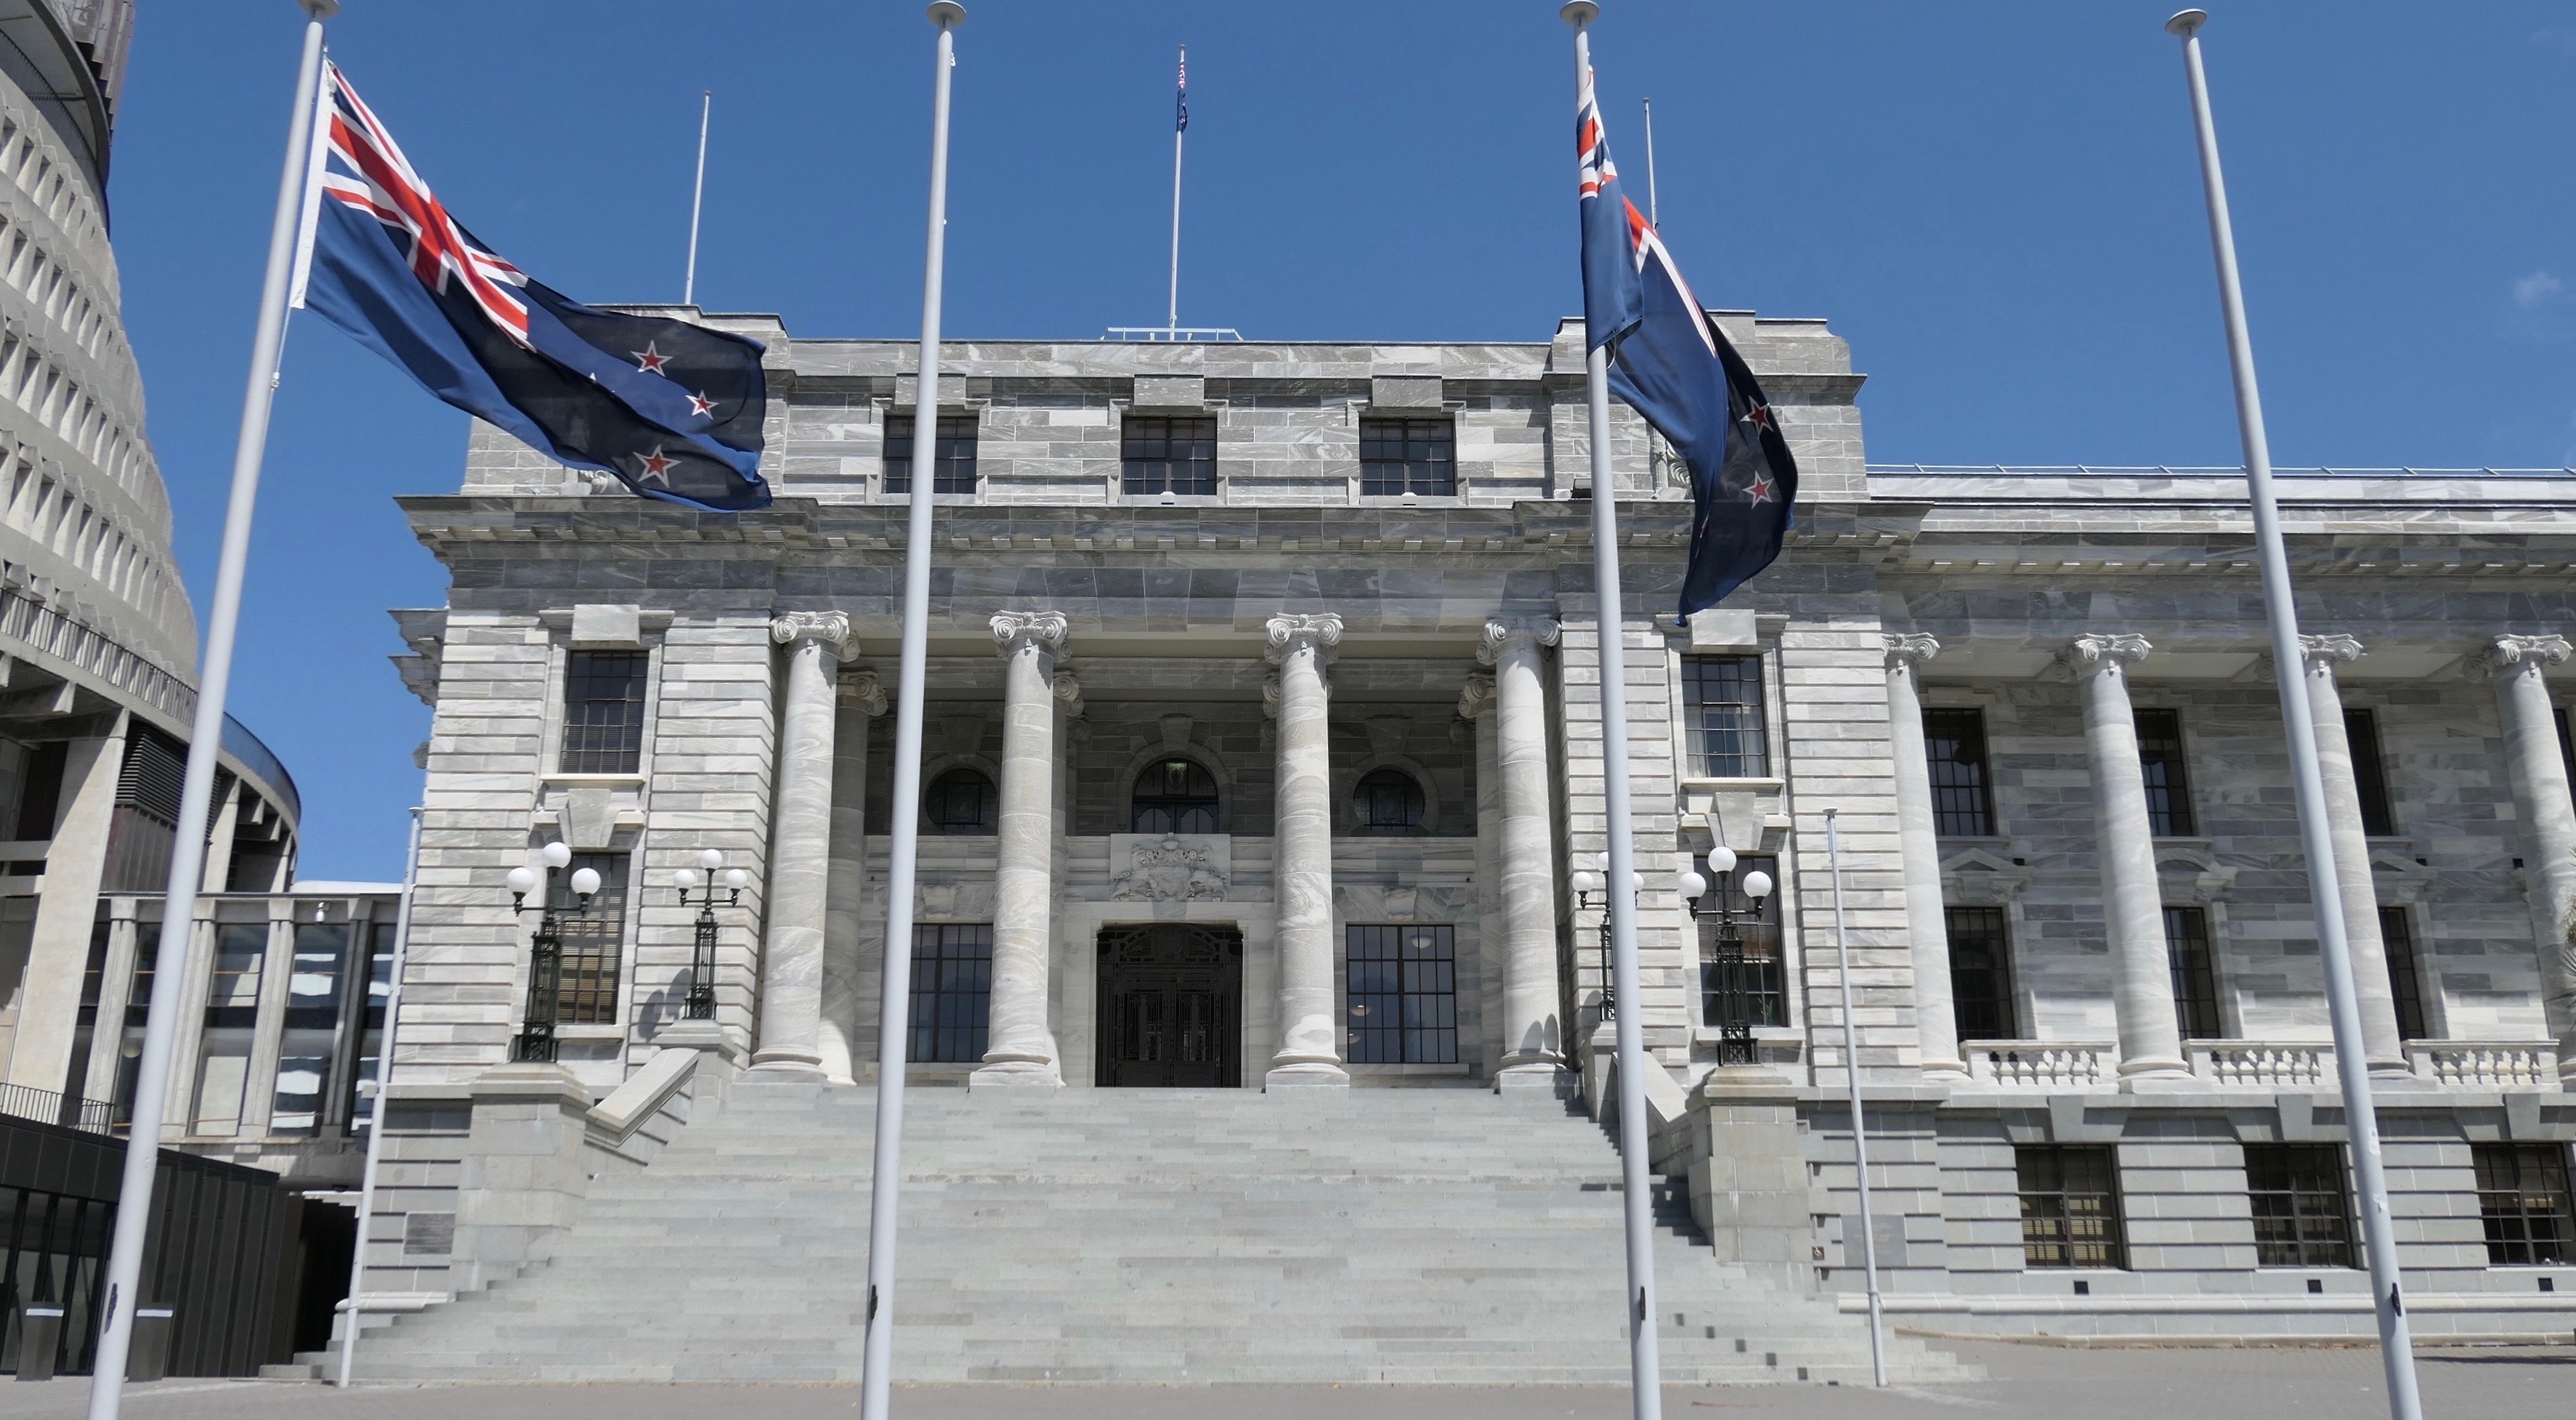 Parliament House with New Zealand flags